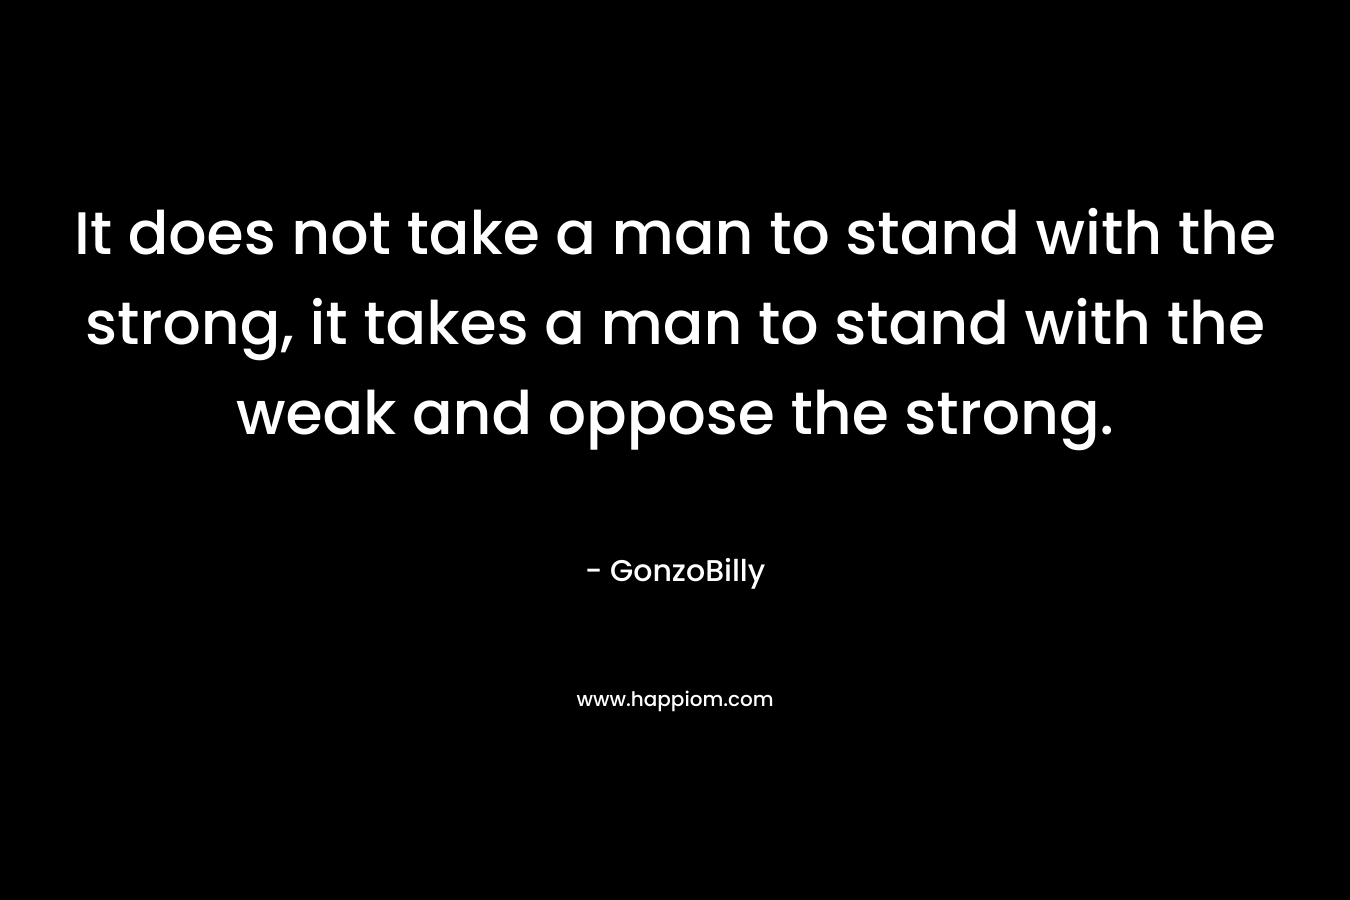 It does not take a man to stand with the strong, it takes a man to stand with the weak and oppose the strong.